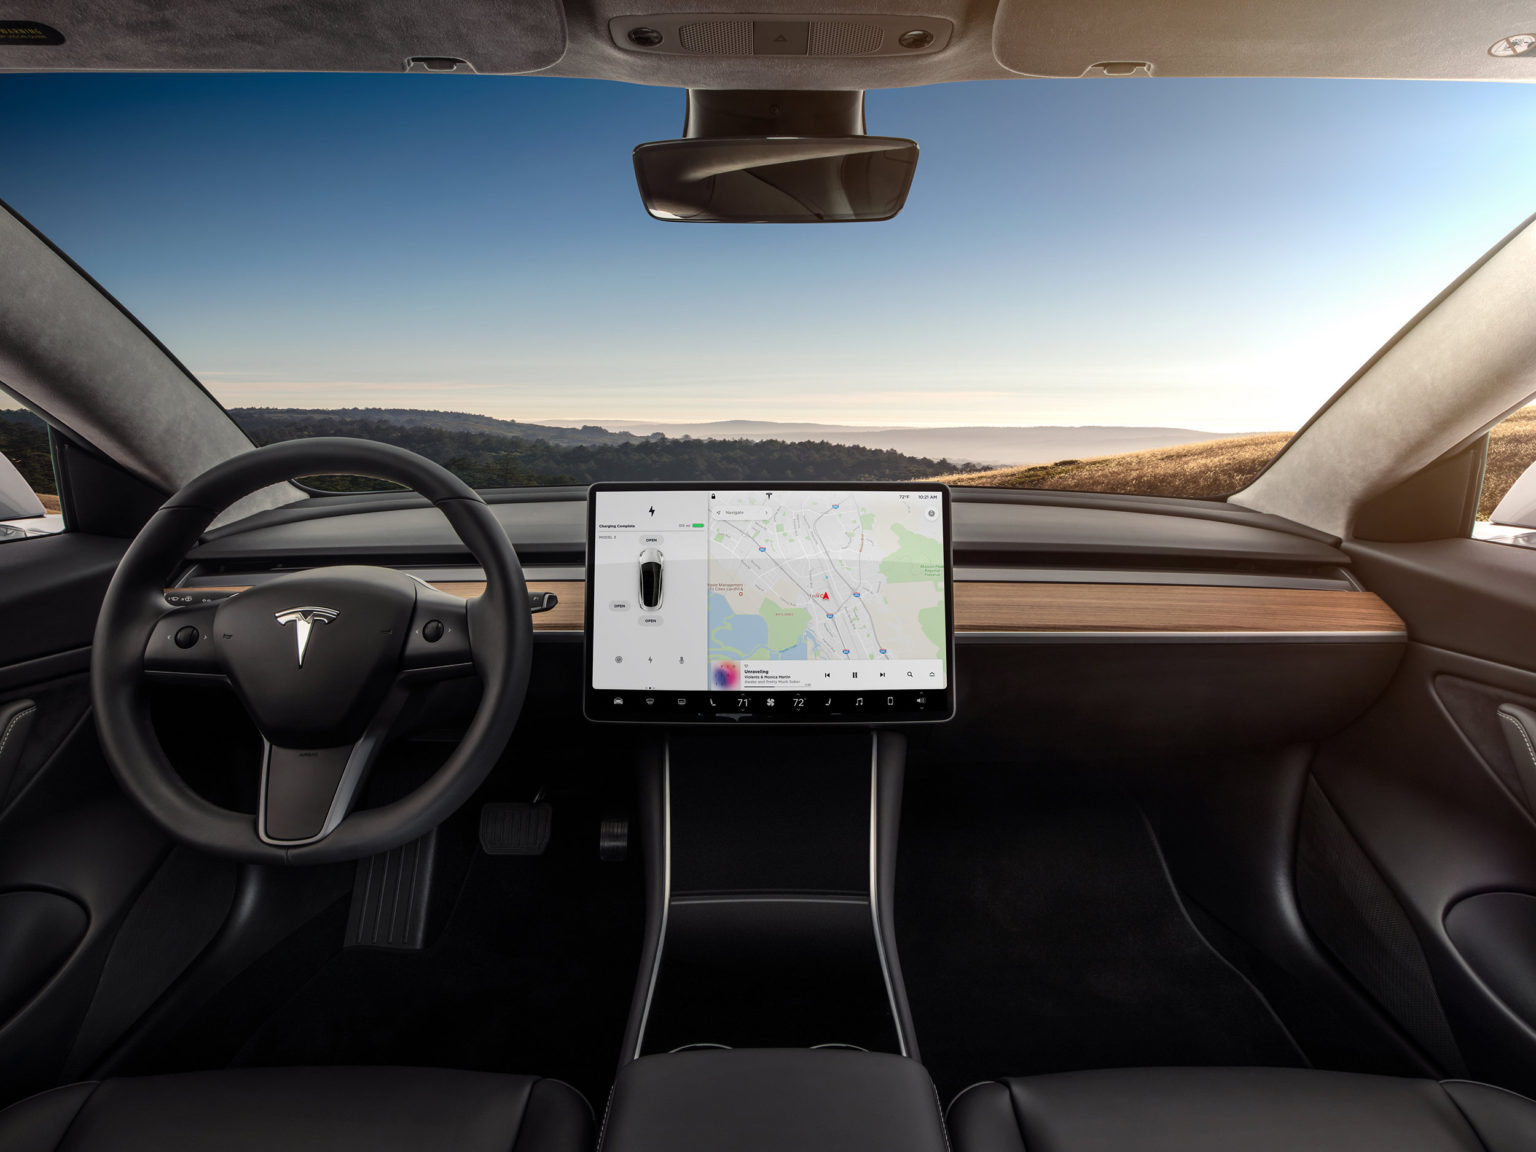 Tesla is currently pushing an update for new technology to its customers.